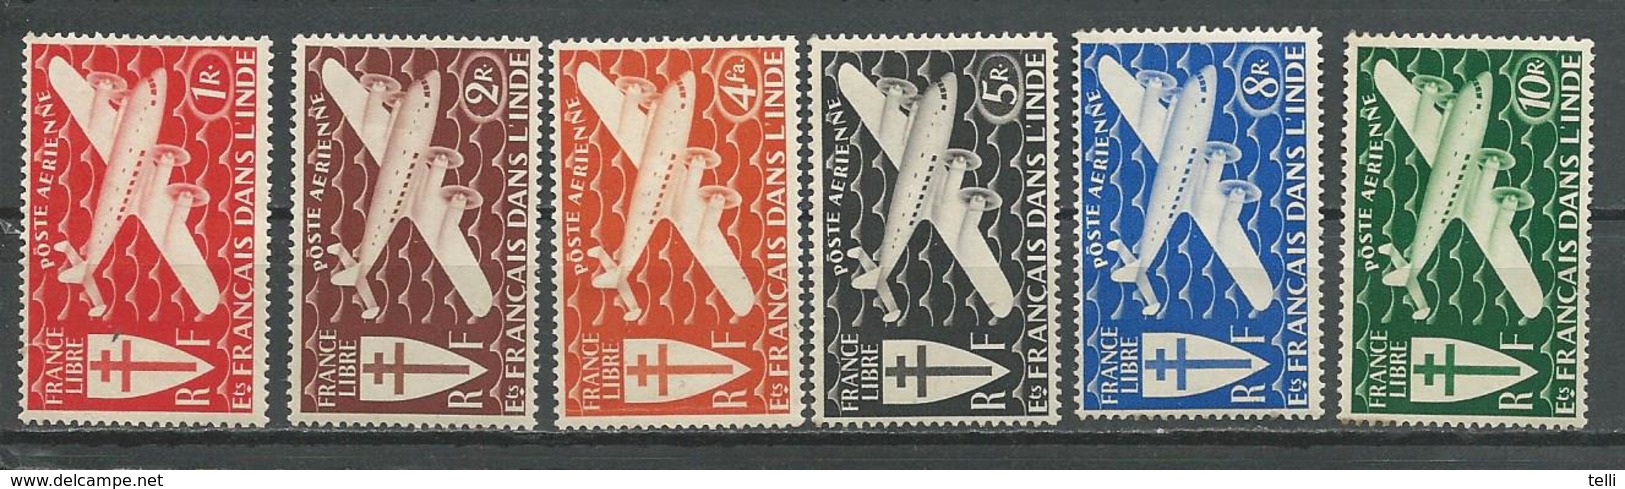 INDE FRANCAISE Scott C1-c6 Yvert PA1-PA6 (6) * Cote 8,80 $ 1942 - Unused Stamps